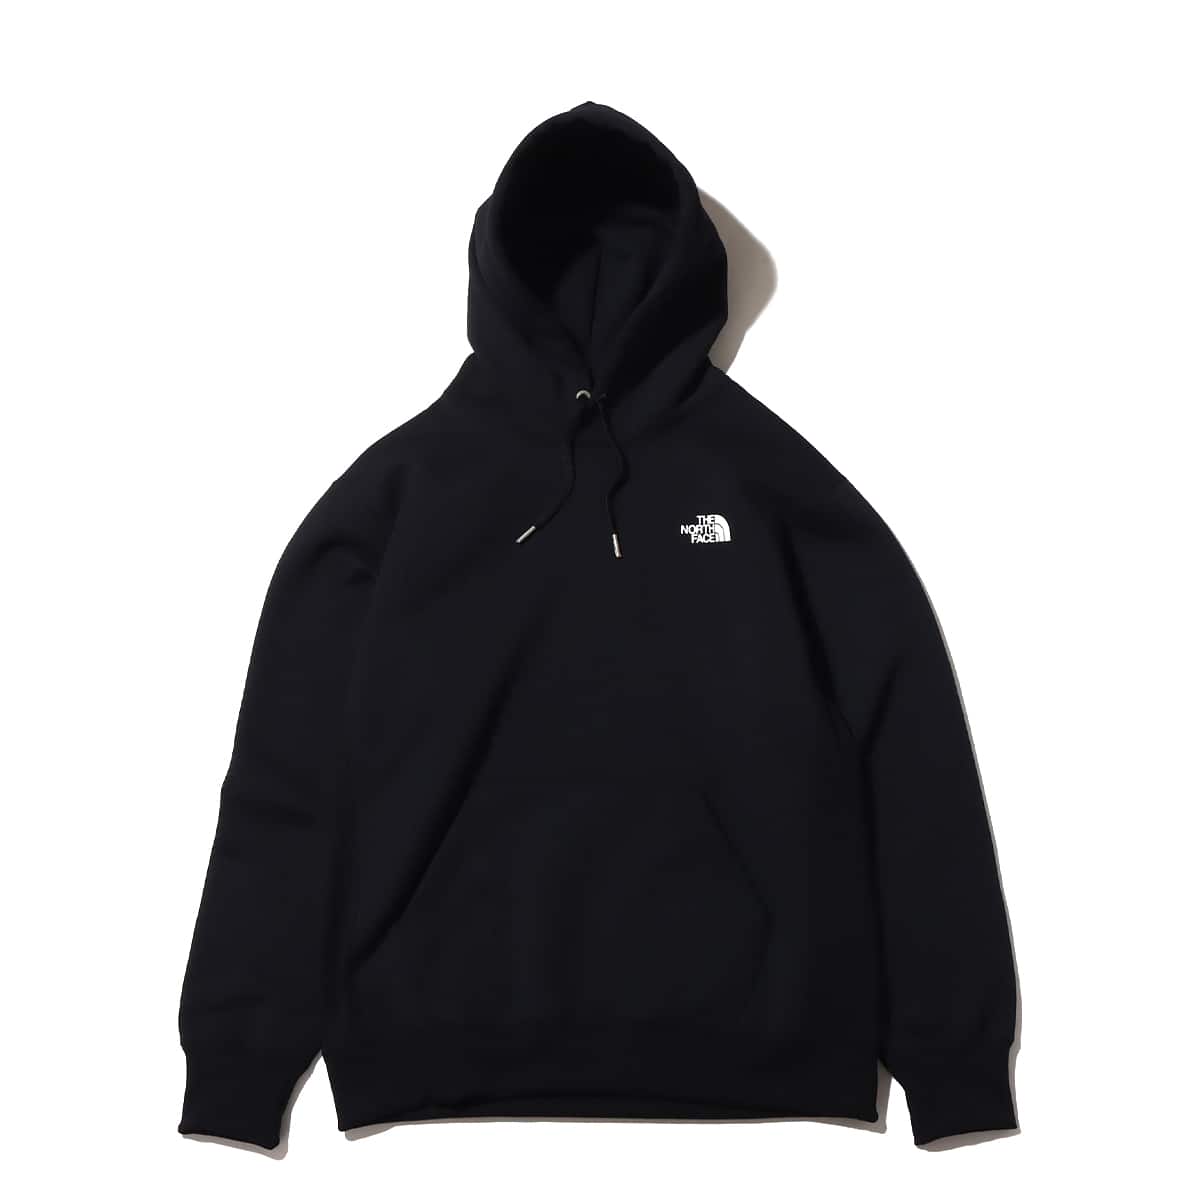 THE NORTH FACE BACK SPUARE LOGO HOODIE ブラック 22FW-I